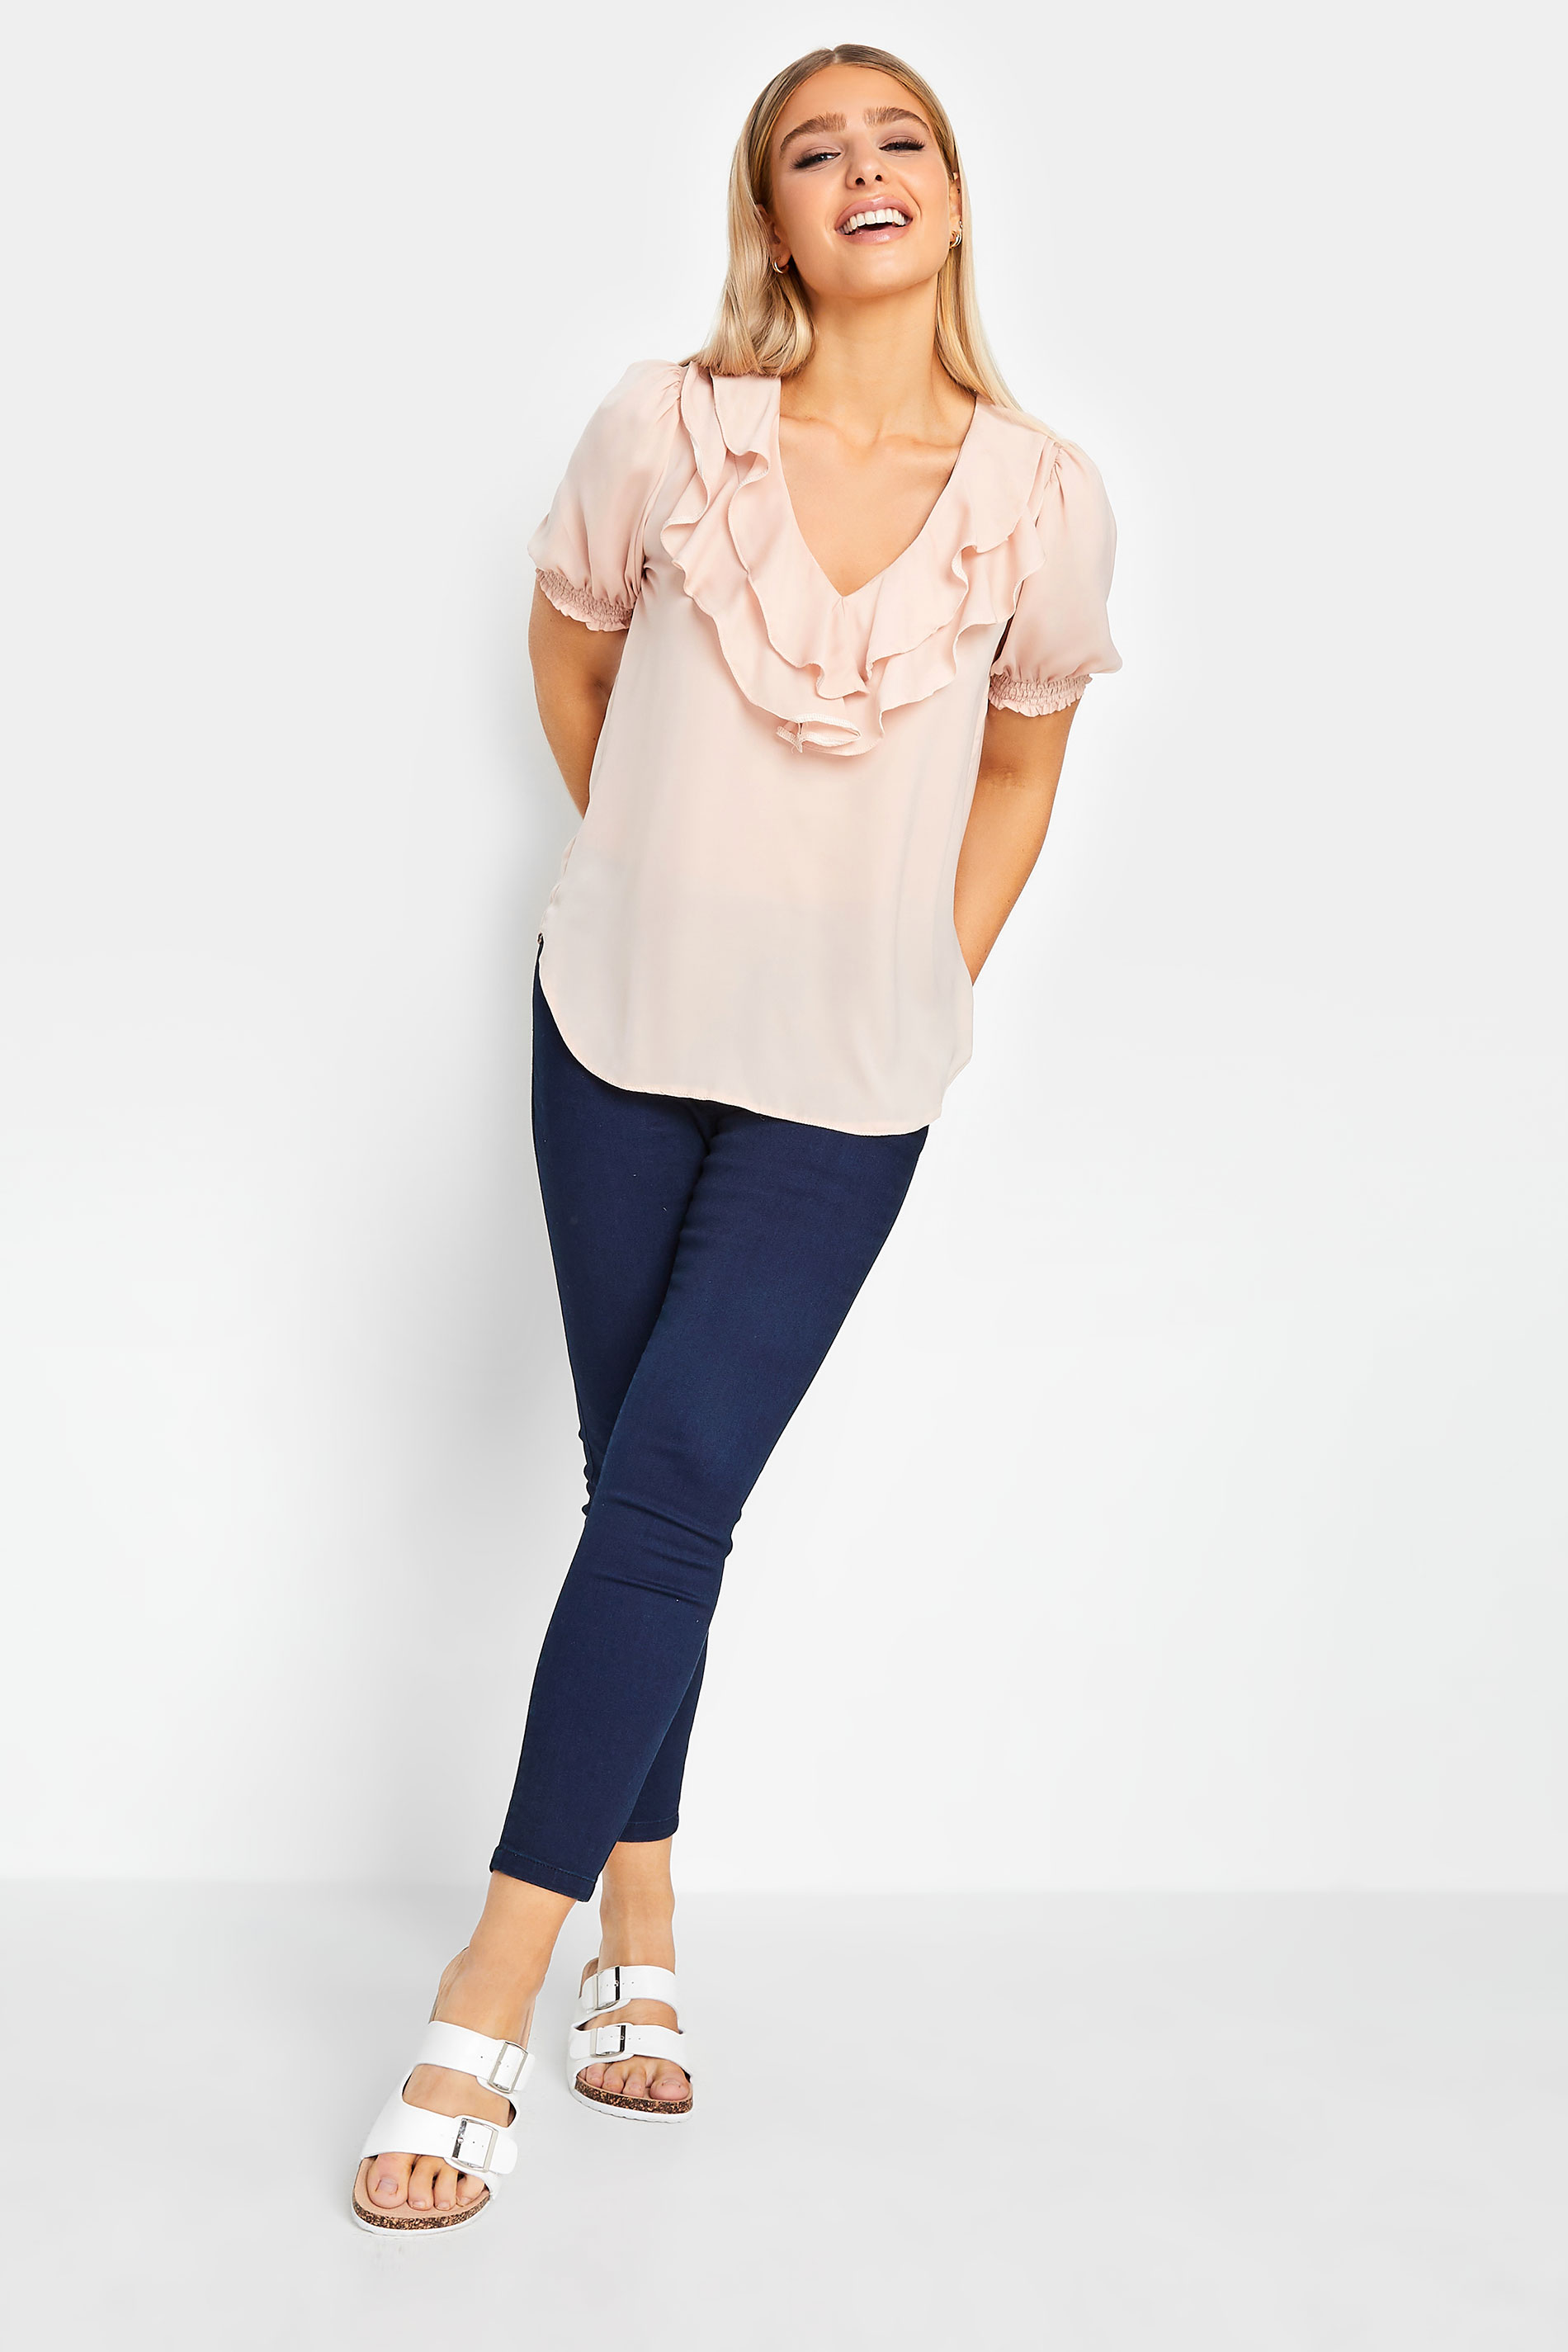 M&Co Blush Pink Frill Front Blouse | M&Co 2